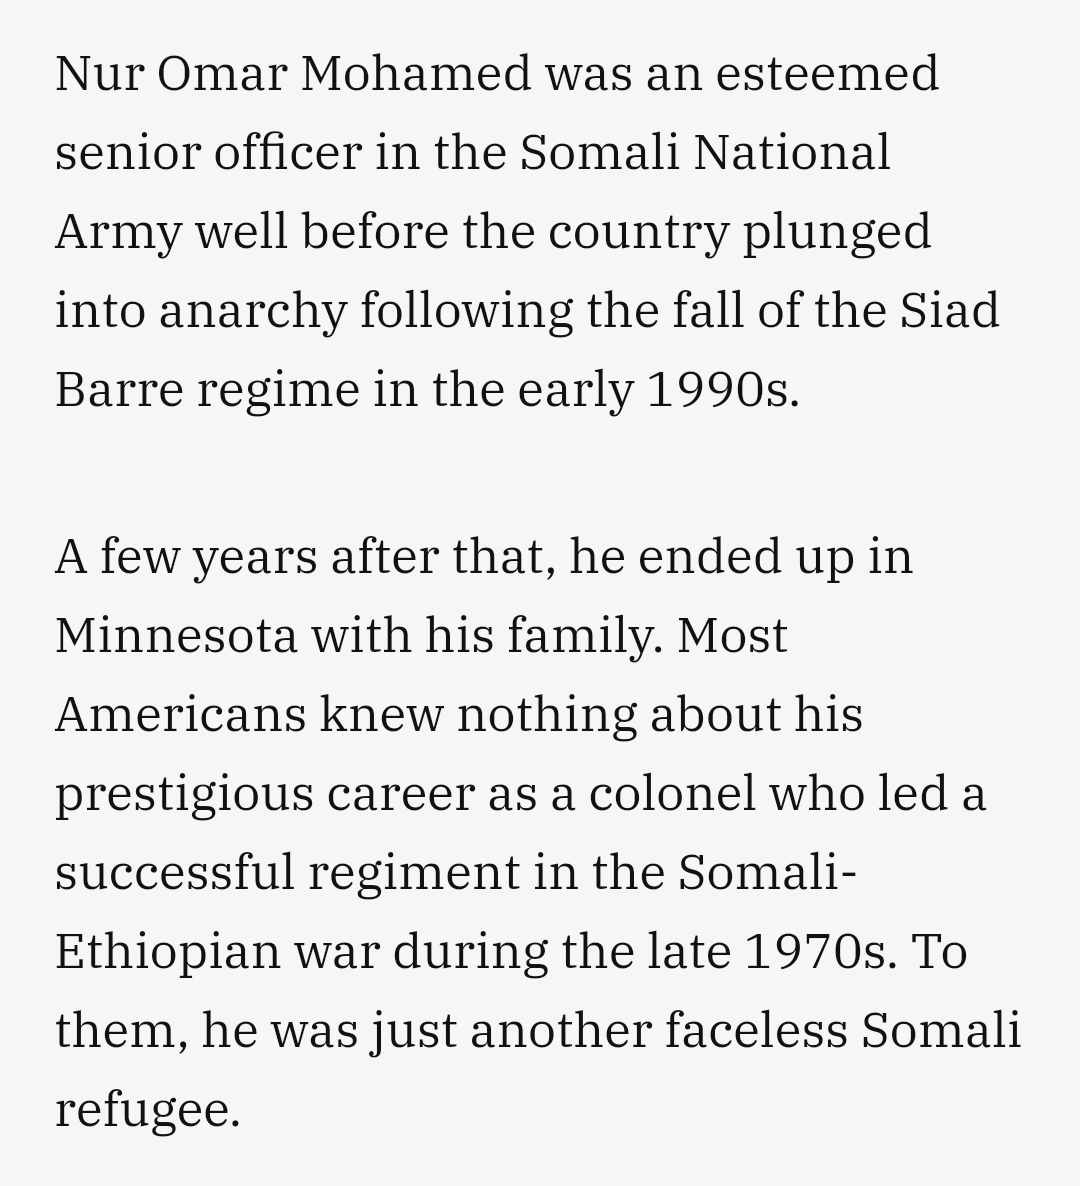 A local newspaper (Sahan Journal) included quotes from his family & friends about the life he led.He was born in Somalia, trained in the USSR, was a ranking Officer in the Somali army, fled his Mogadishu compound for a Kenyan refugee camp, and ultimately emigrated to the US.